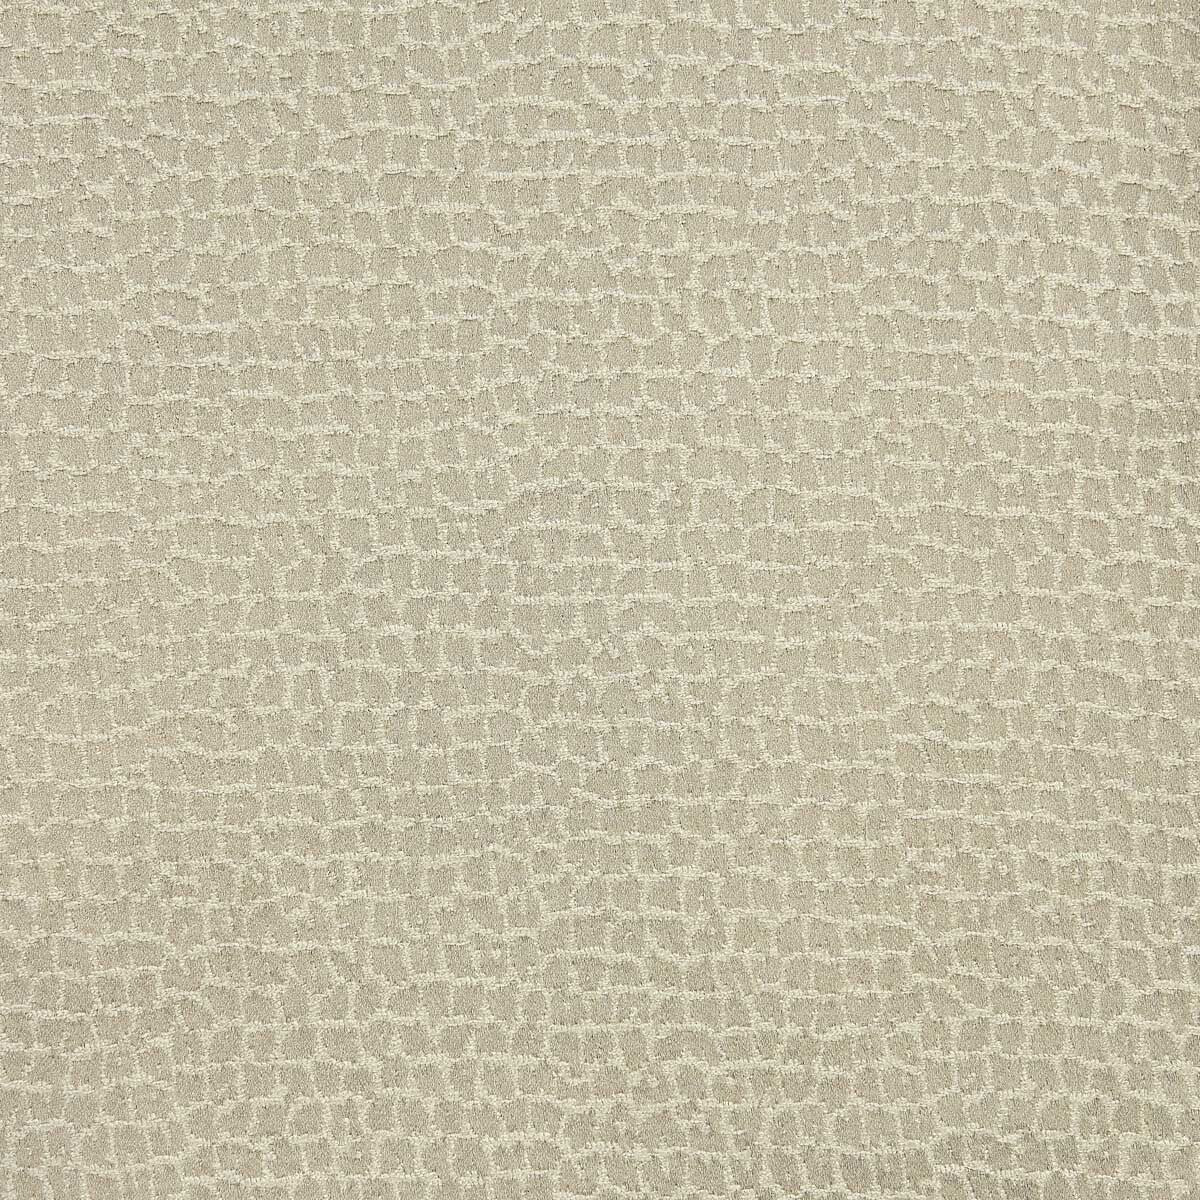 Gaudi fabric in 9 color - pattern LZ-30410.09.0 - by Kravet Couture in the Lizzo collection